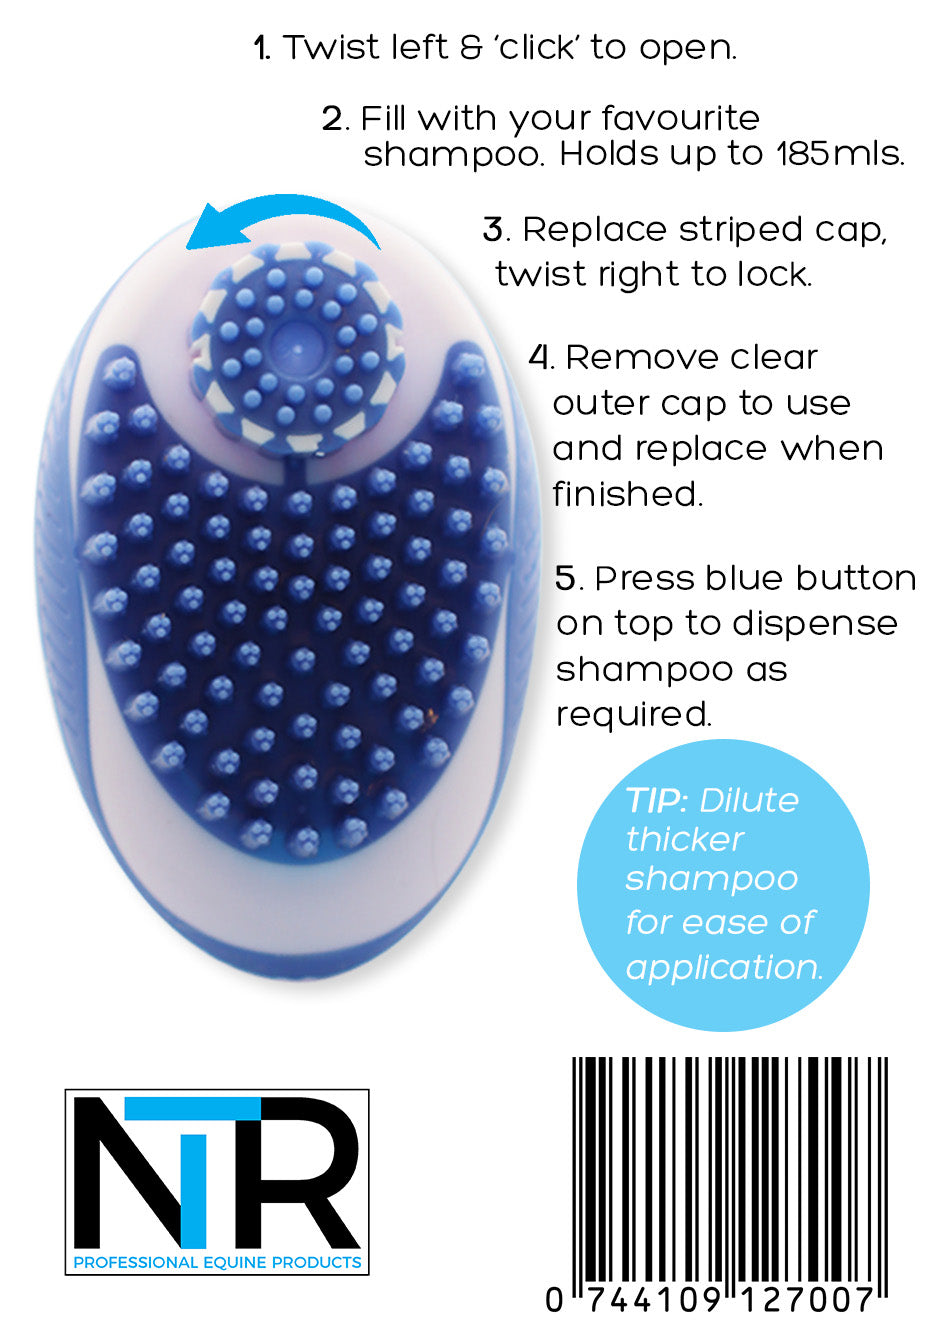 blue and white brush with rubber bristles